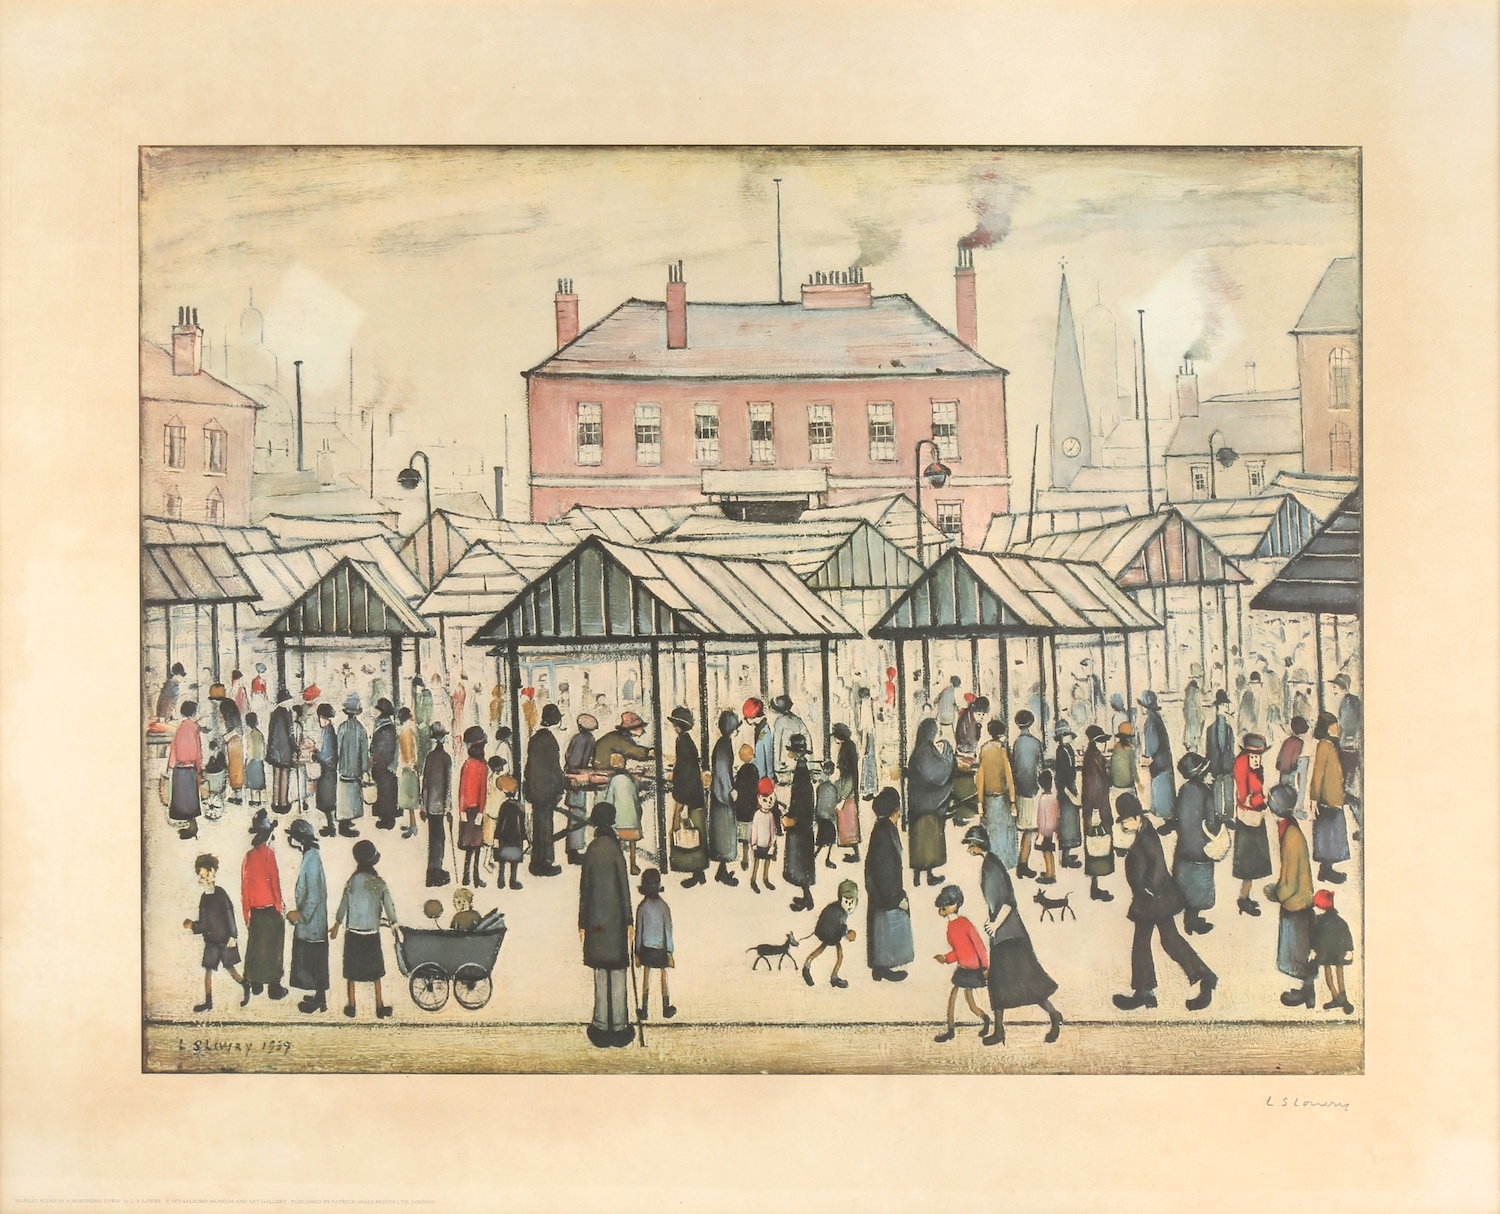 A print of 'Market Scene in a Northern Town' by LS Lowry